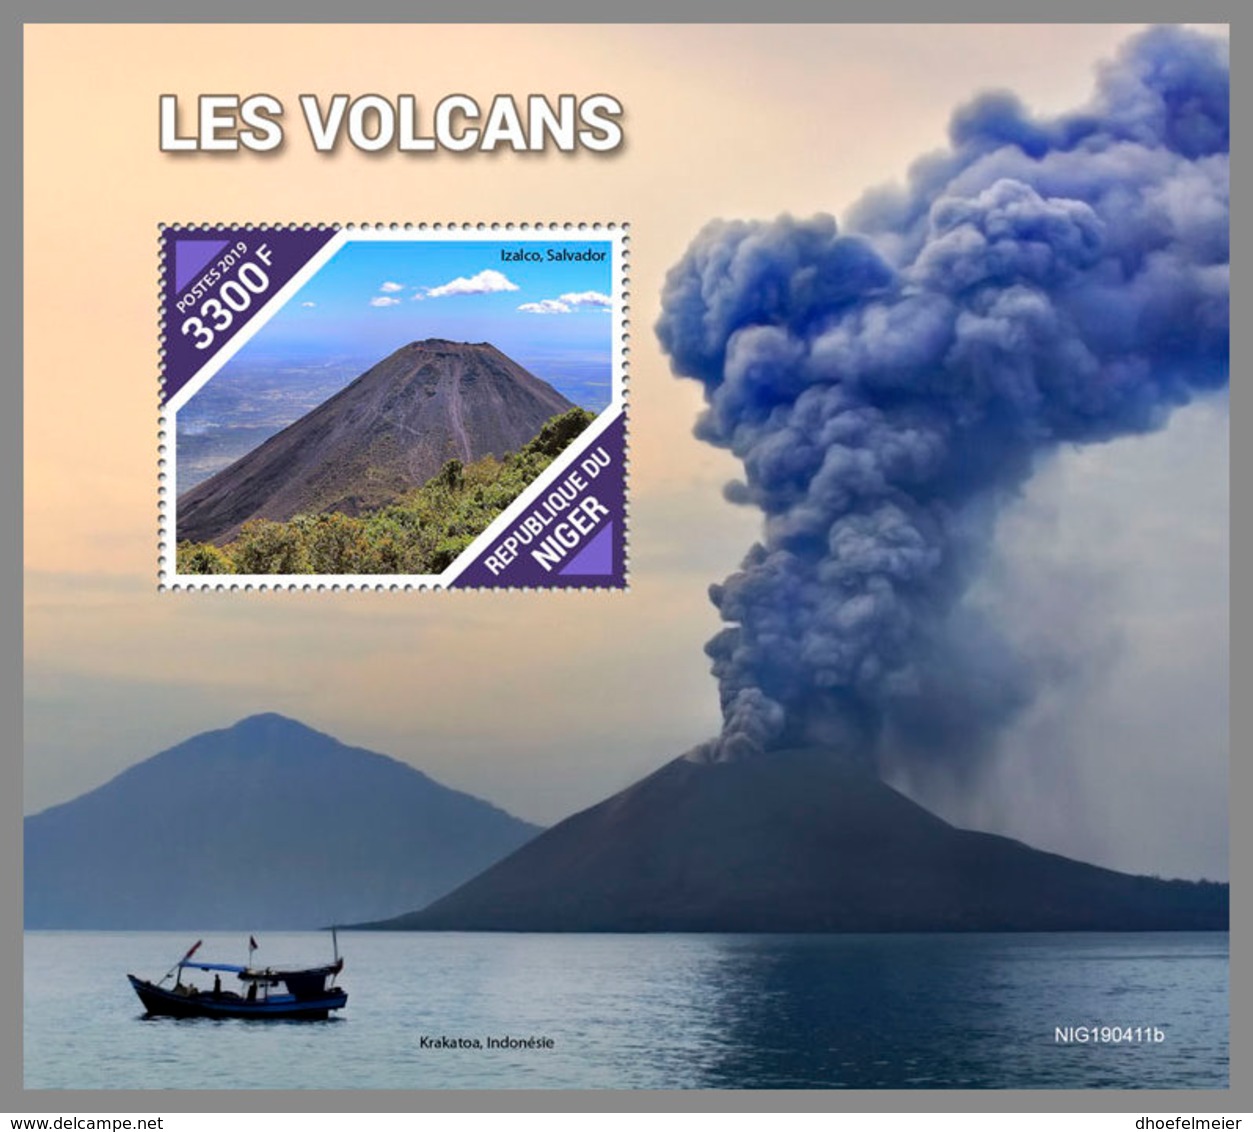 NIGER 2019 MNH Volcanoes Vilkane Volcans S/S - IMPERFORATED - DH1939 - Volcanos